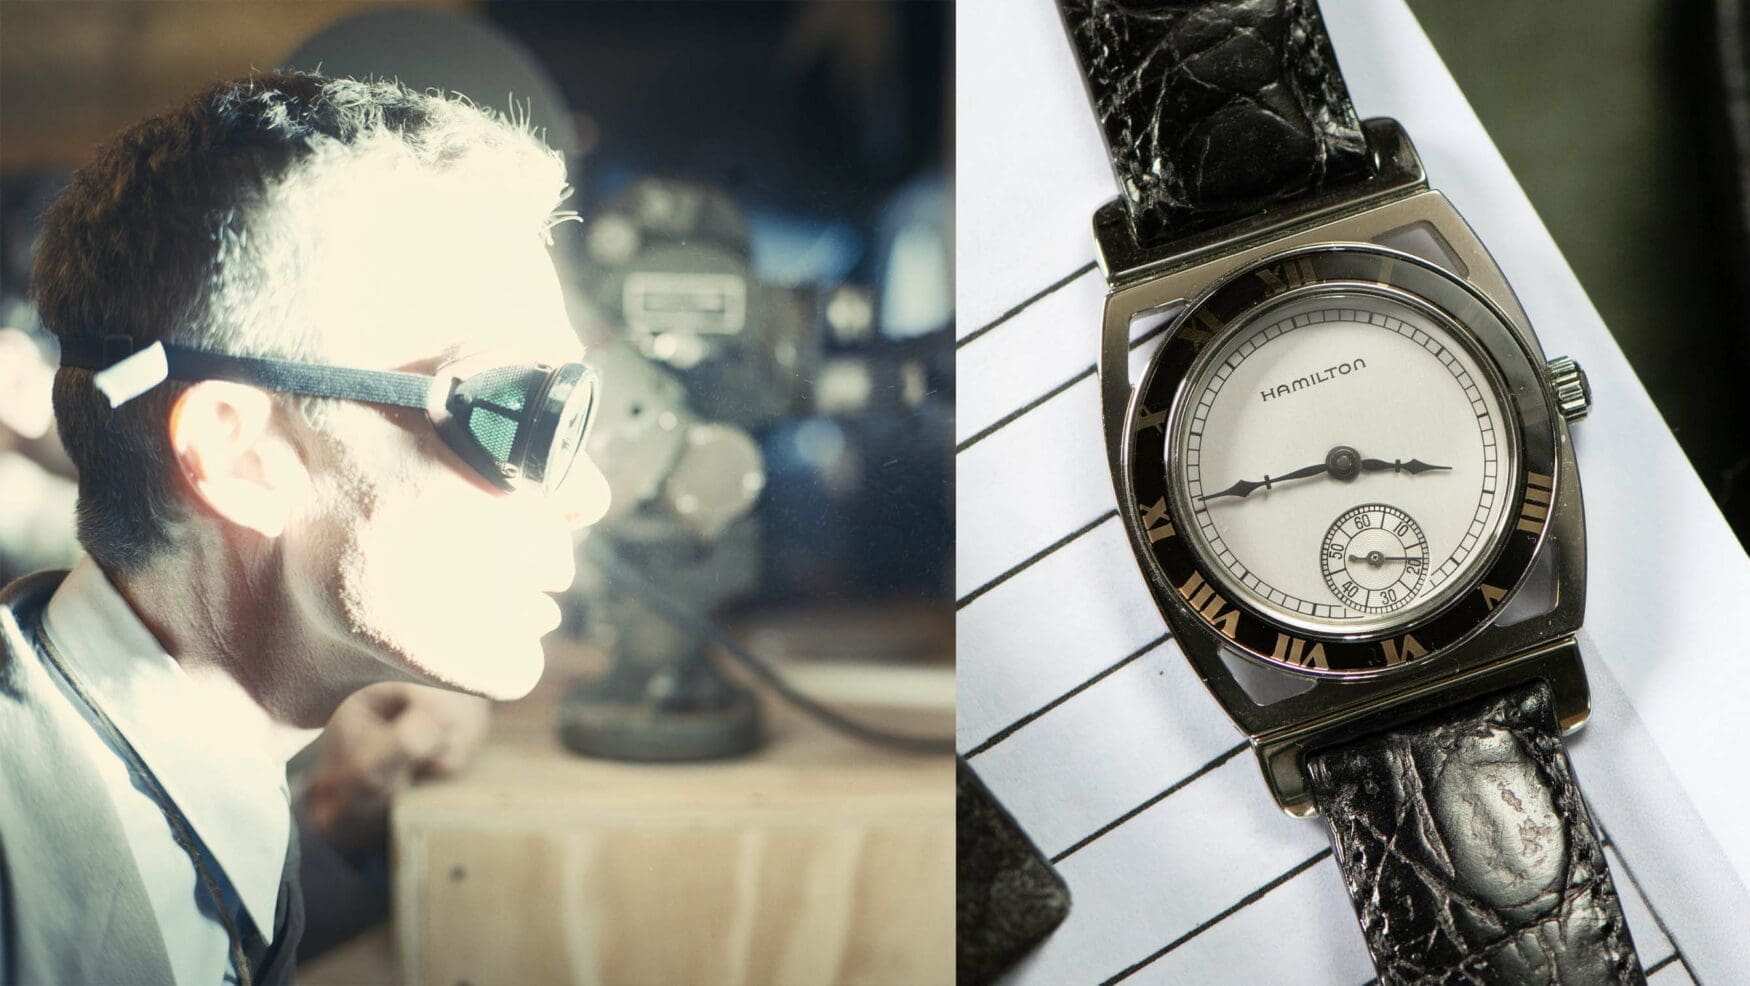 Vintage Hamilton watches get eye-catching cameos in Oppenheimer